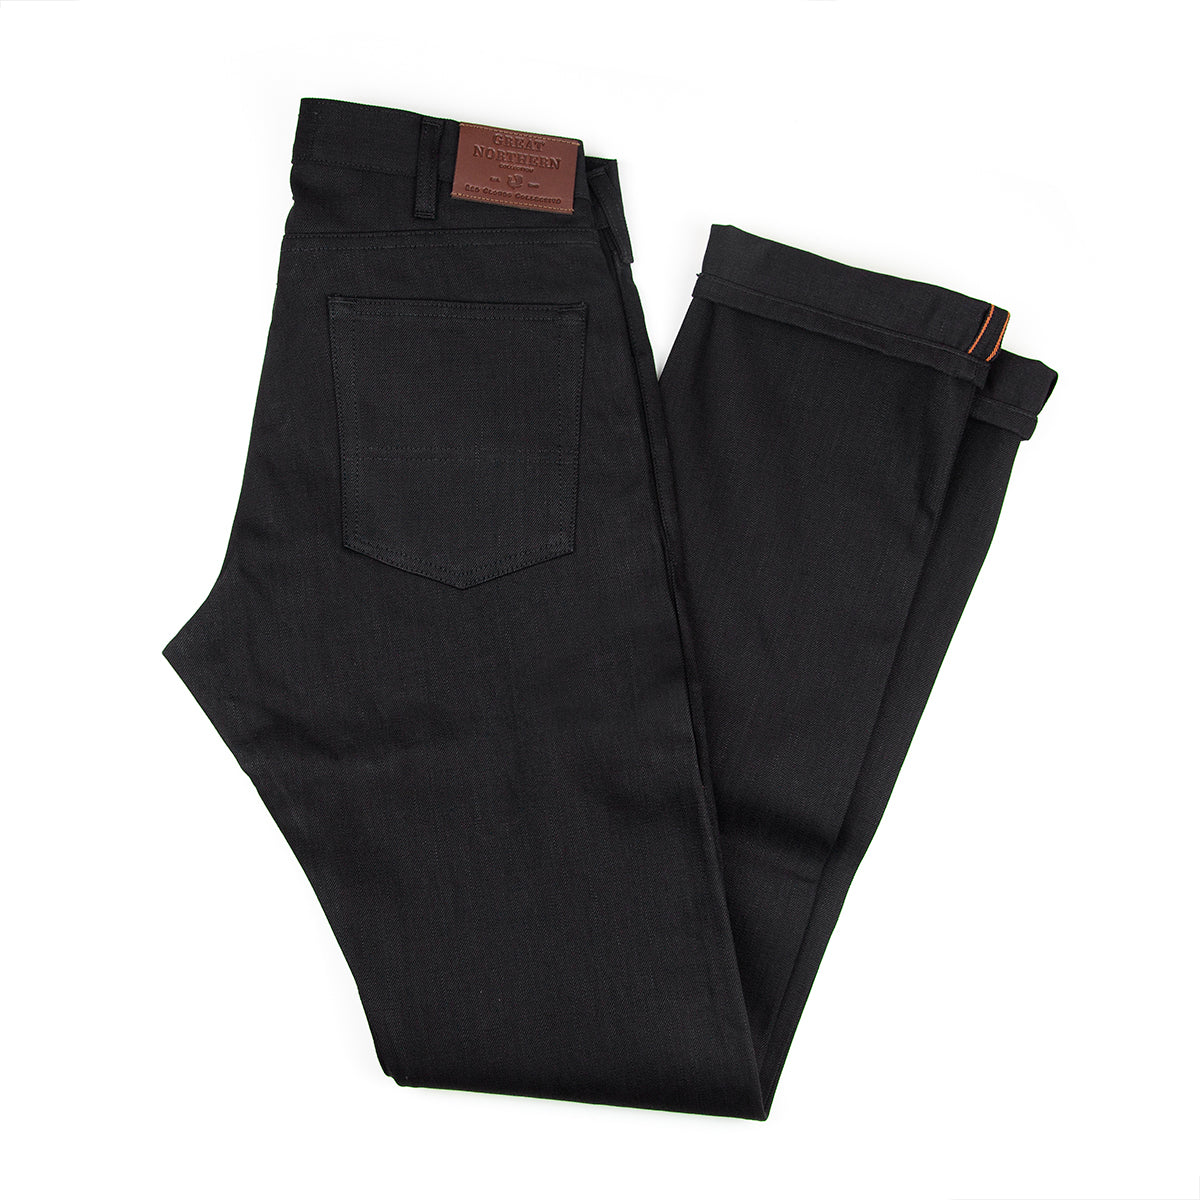 Pants - Red Clouds Collective - Made in the USA